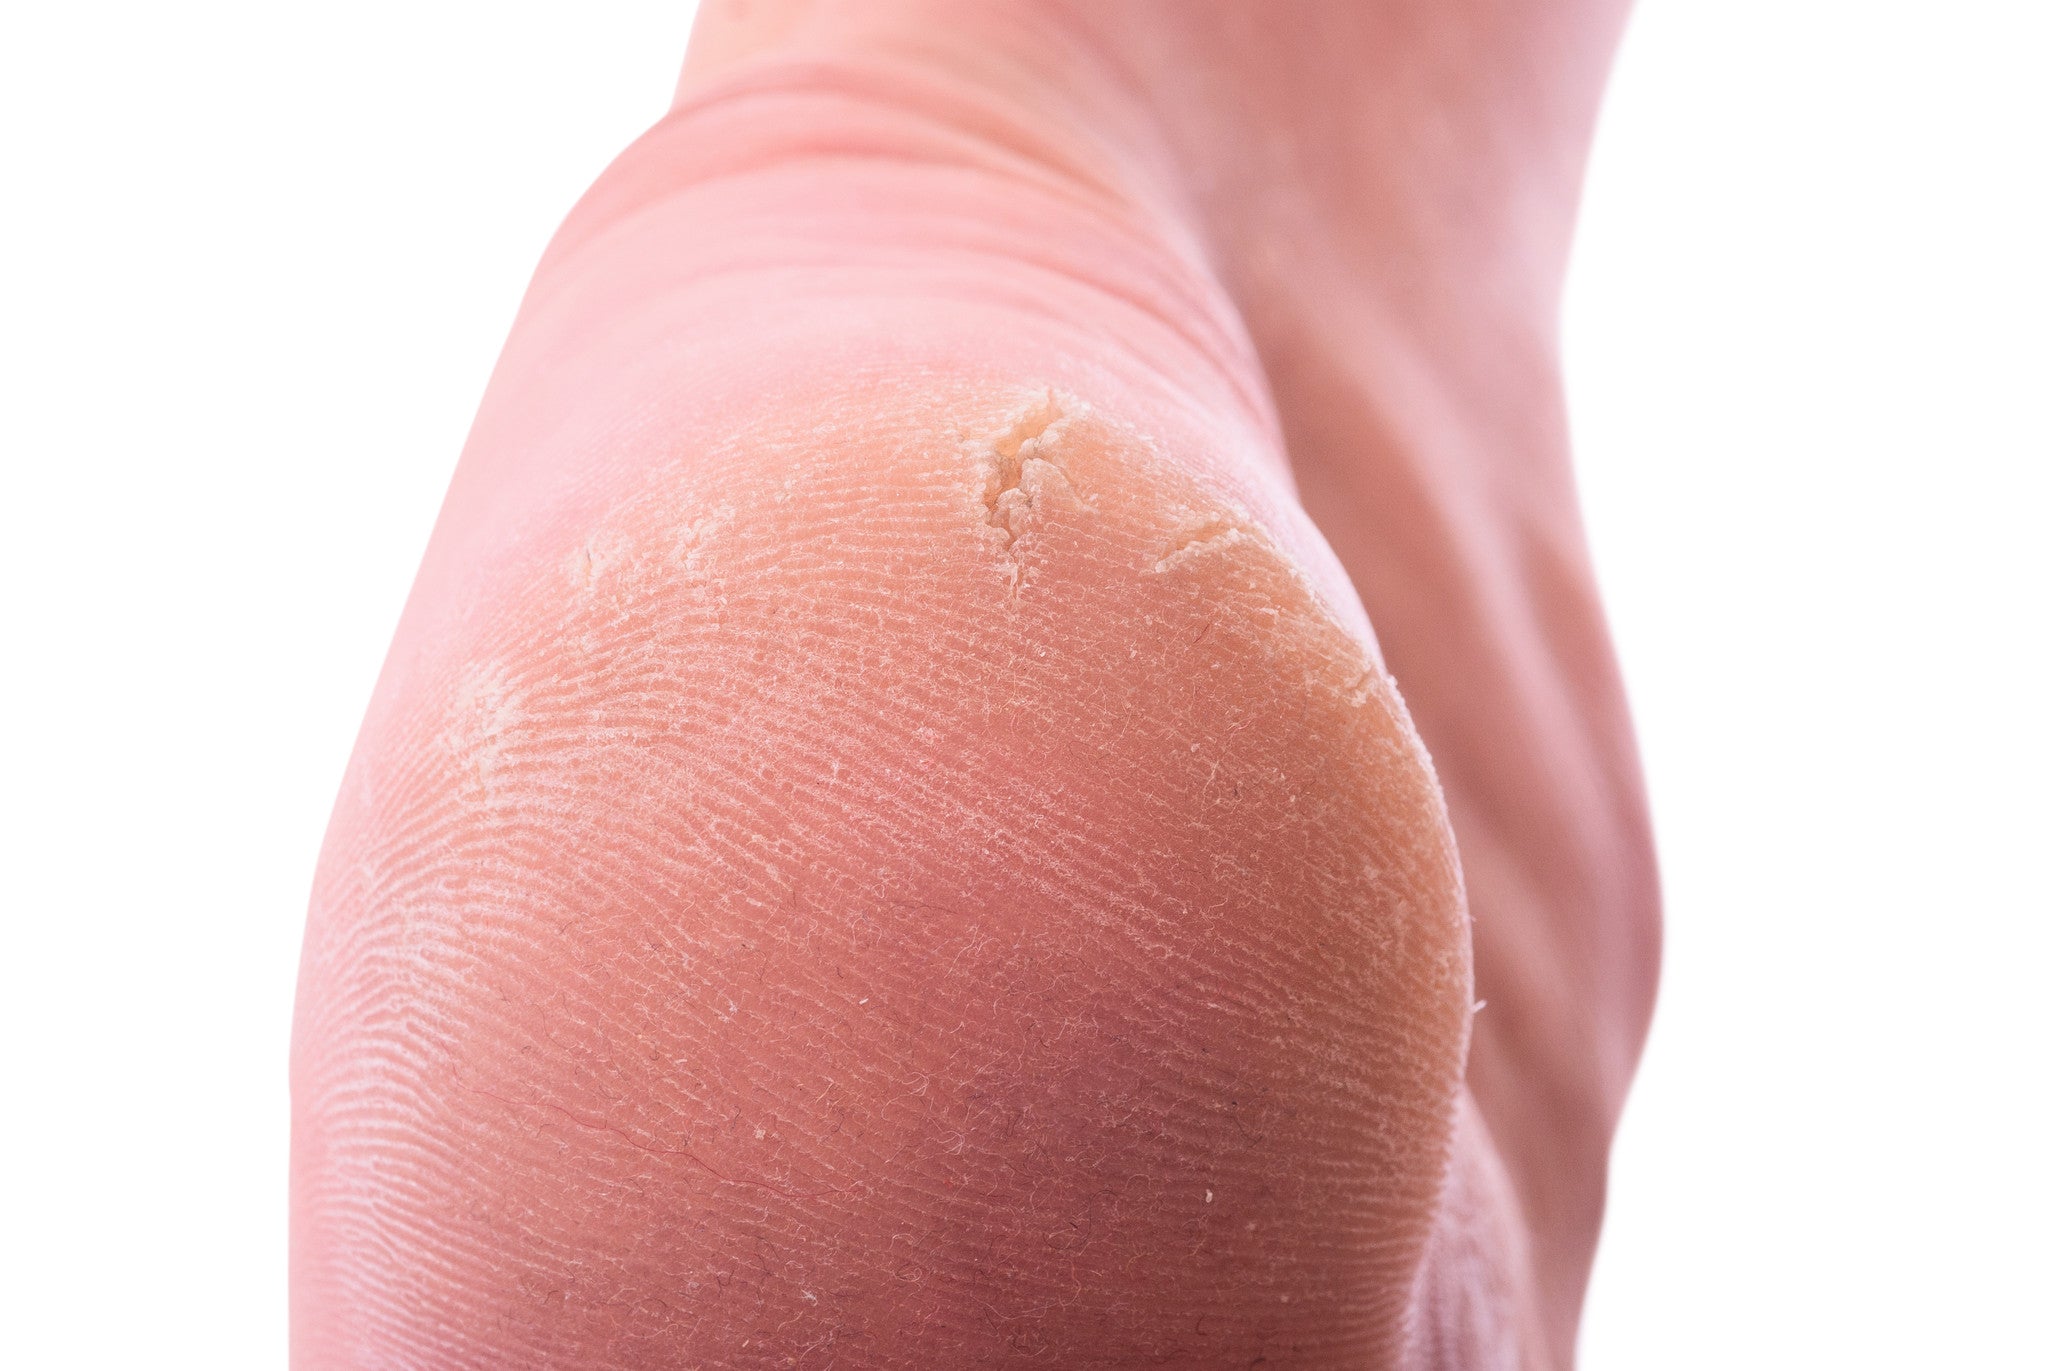 What’s the Difference Between Corns and Calluses?